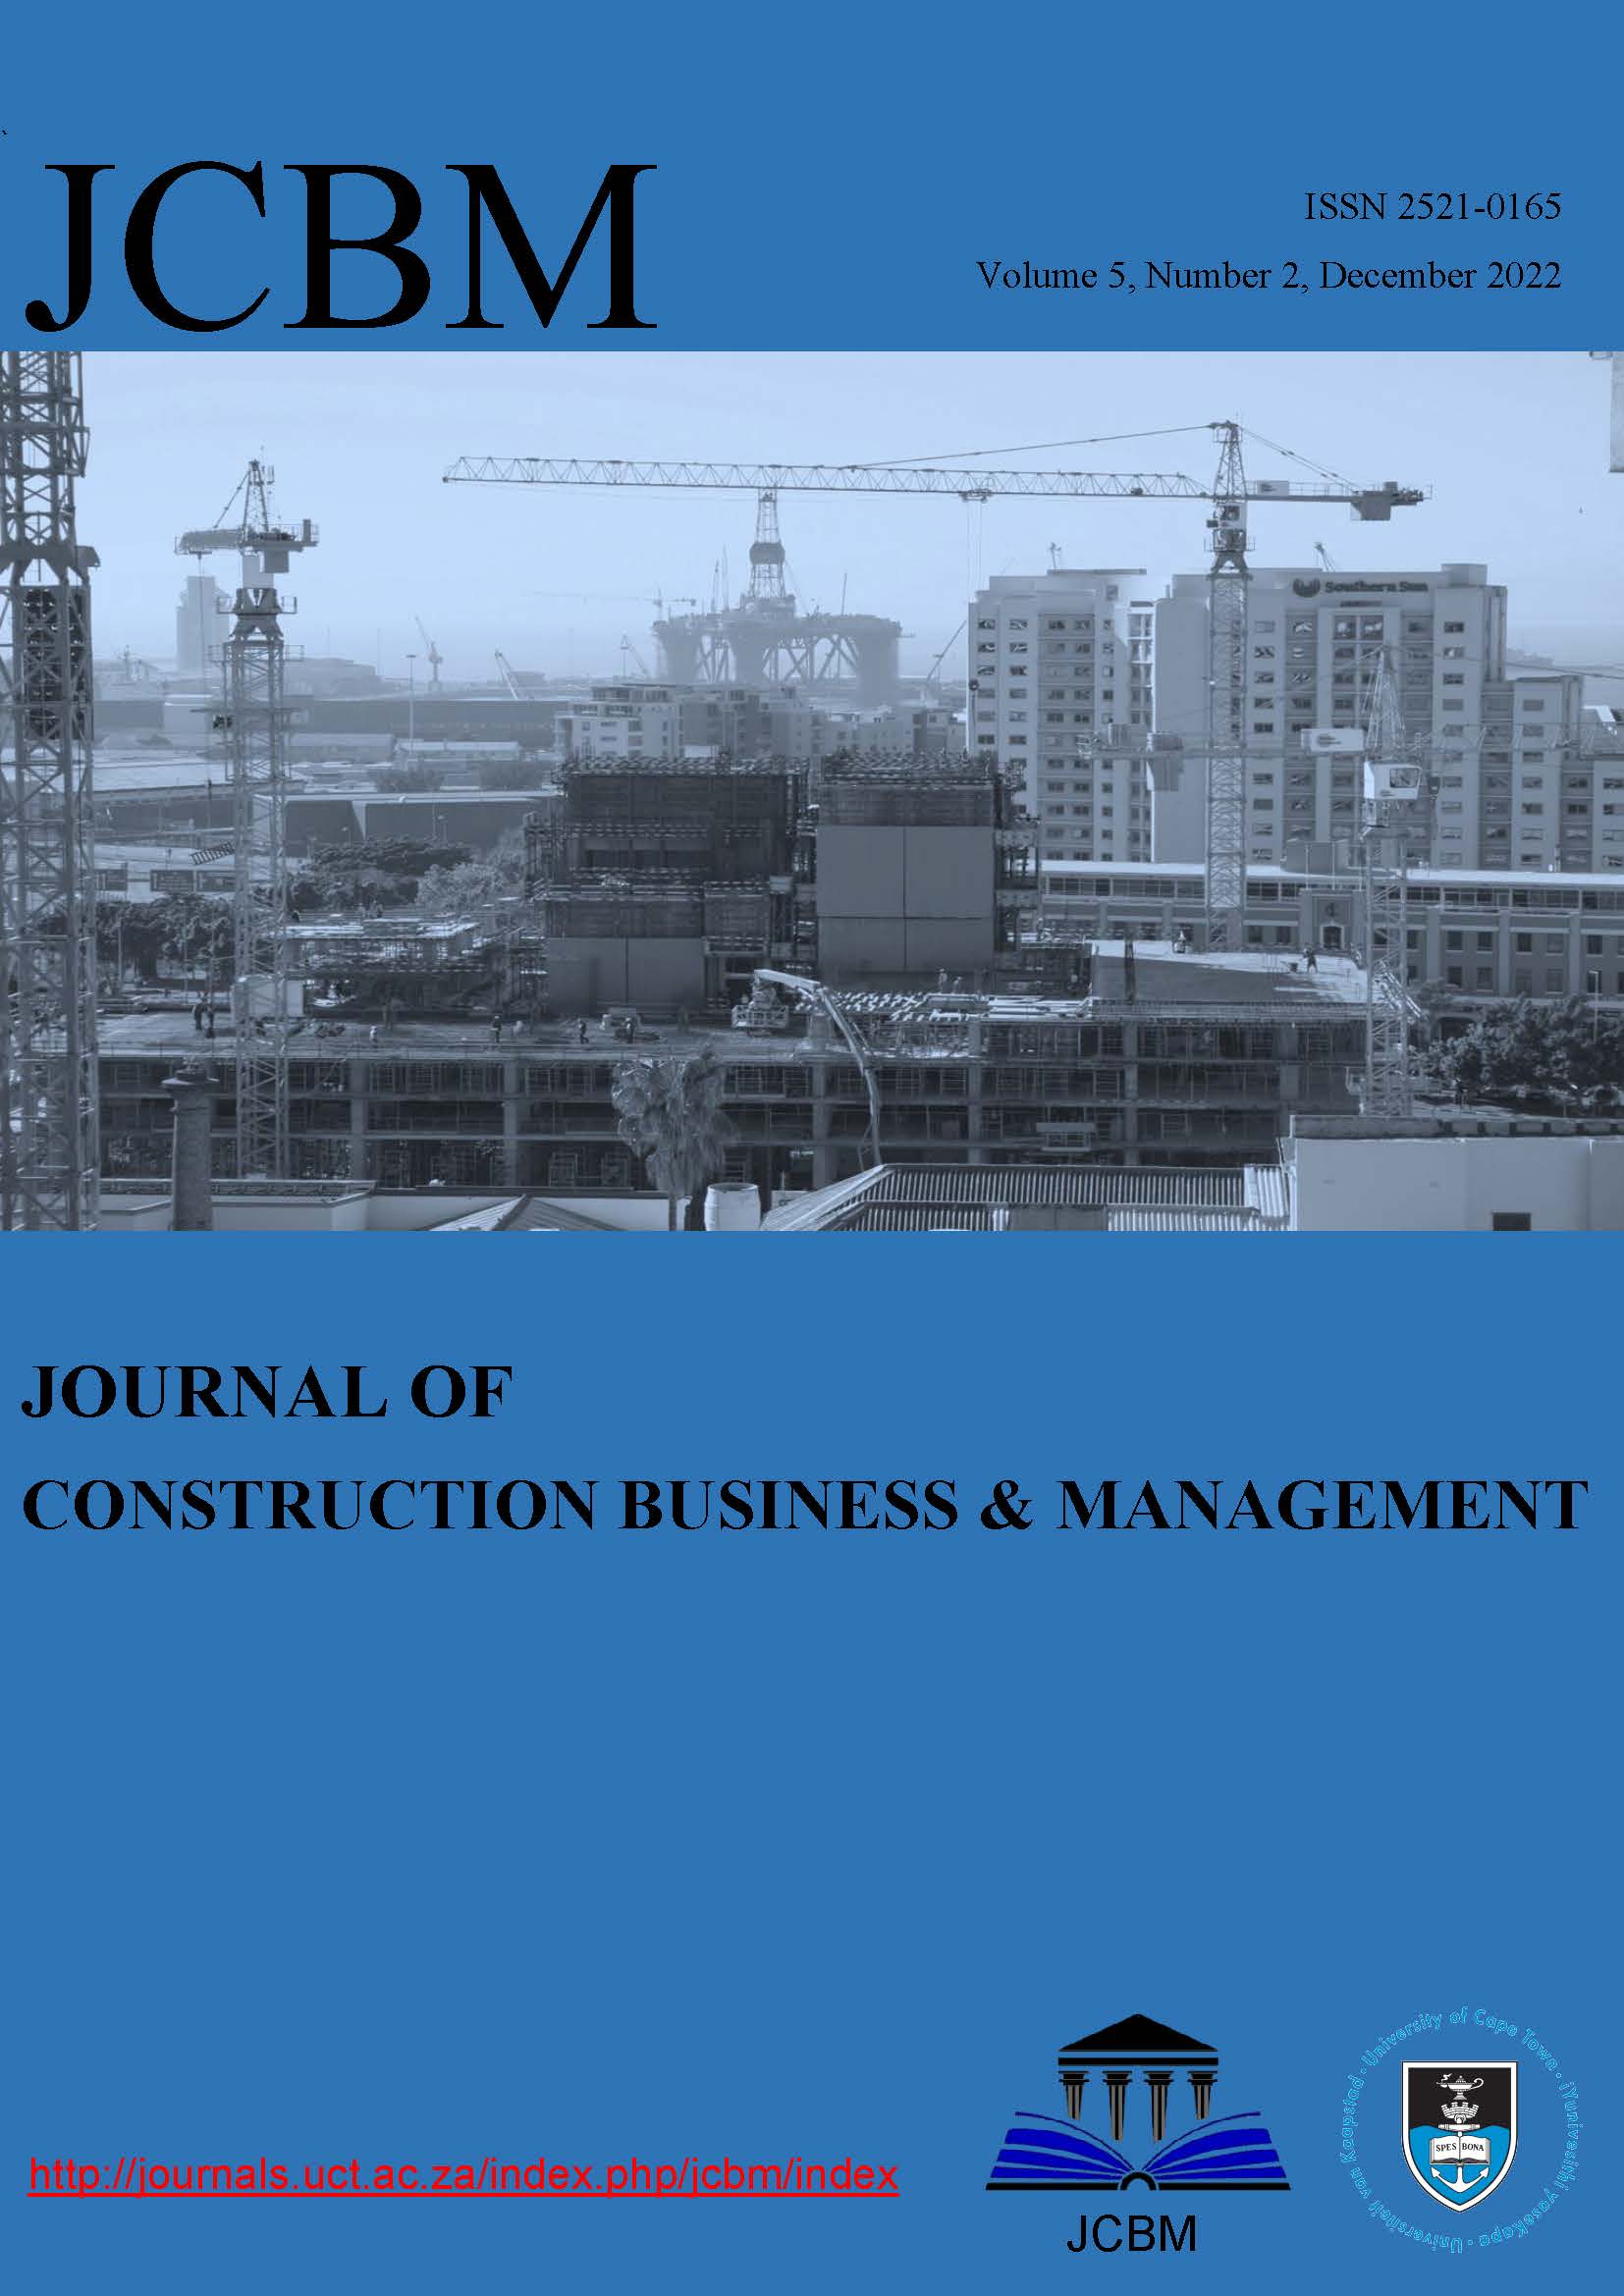 The cover page of the Journal of Construction Business and Management